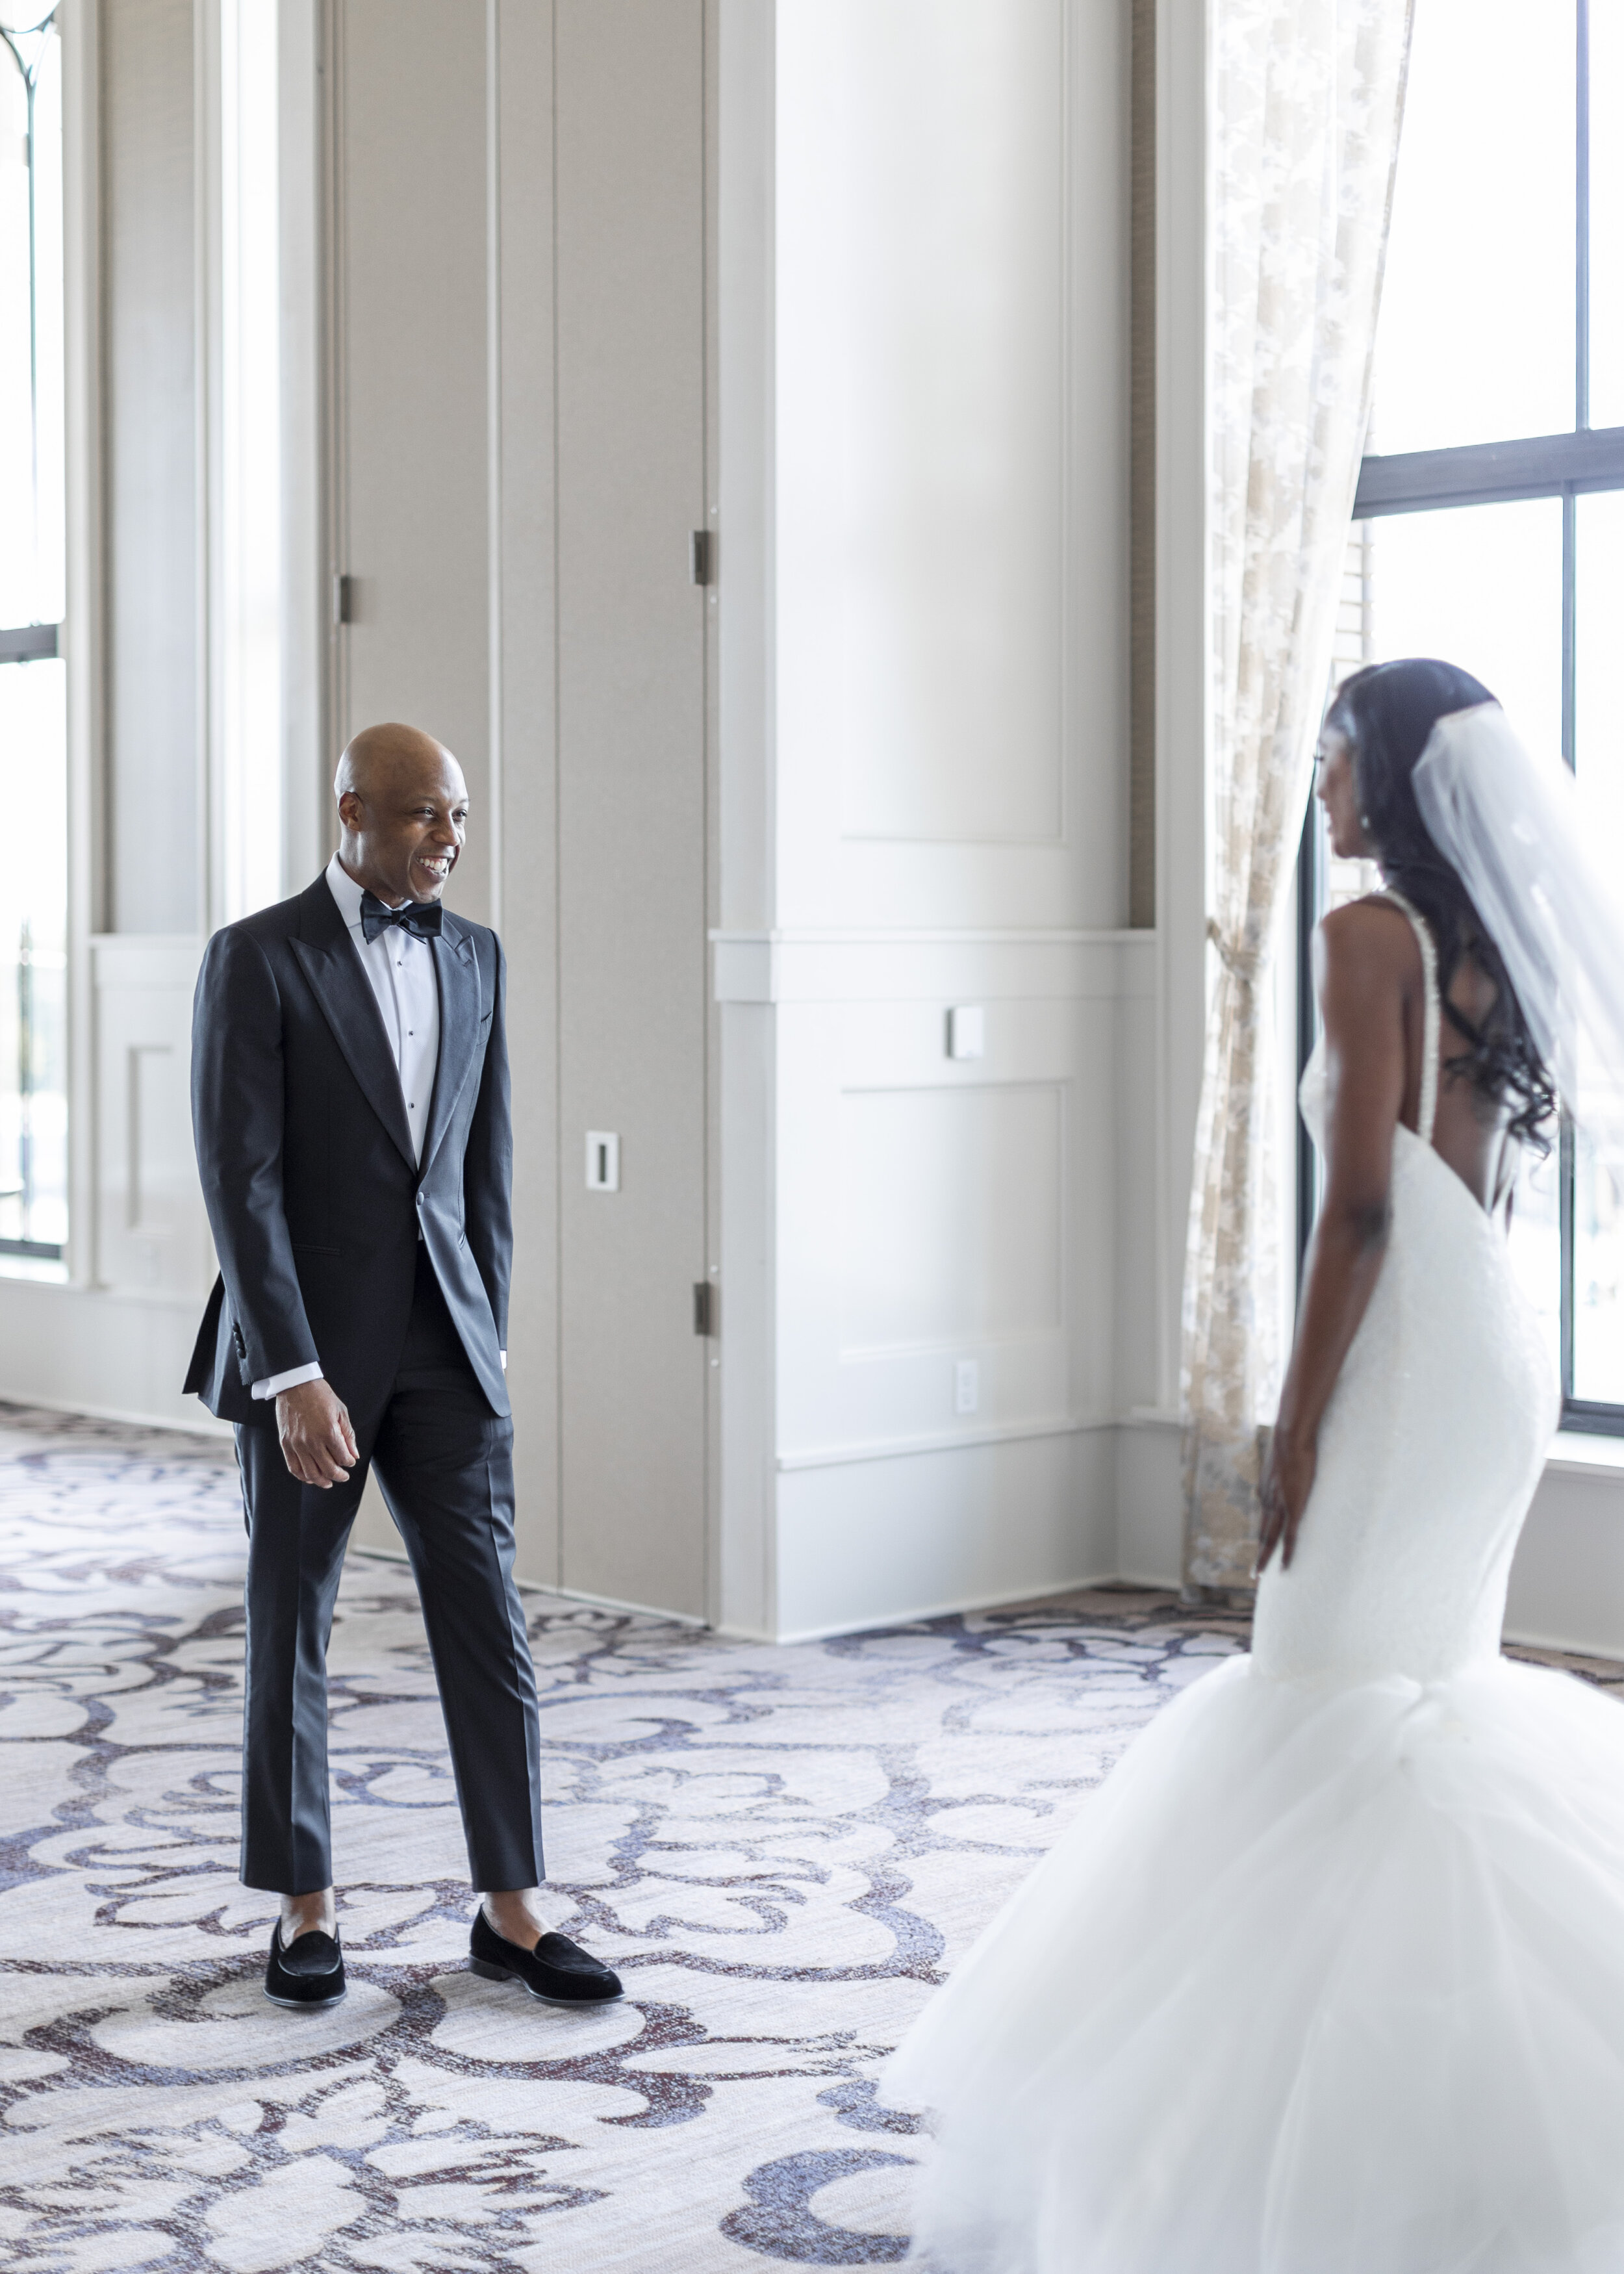  A groom seeing his beautiful bride for the first time on their wedding day. First look wedding photo ideas elegant wedding outfits wedding dress inspiration dallas wedding ideas mermaid wedding dress wedding veil groom outfit ideas shoes for the gro